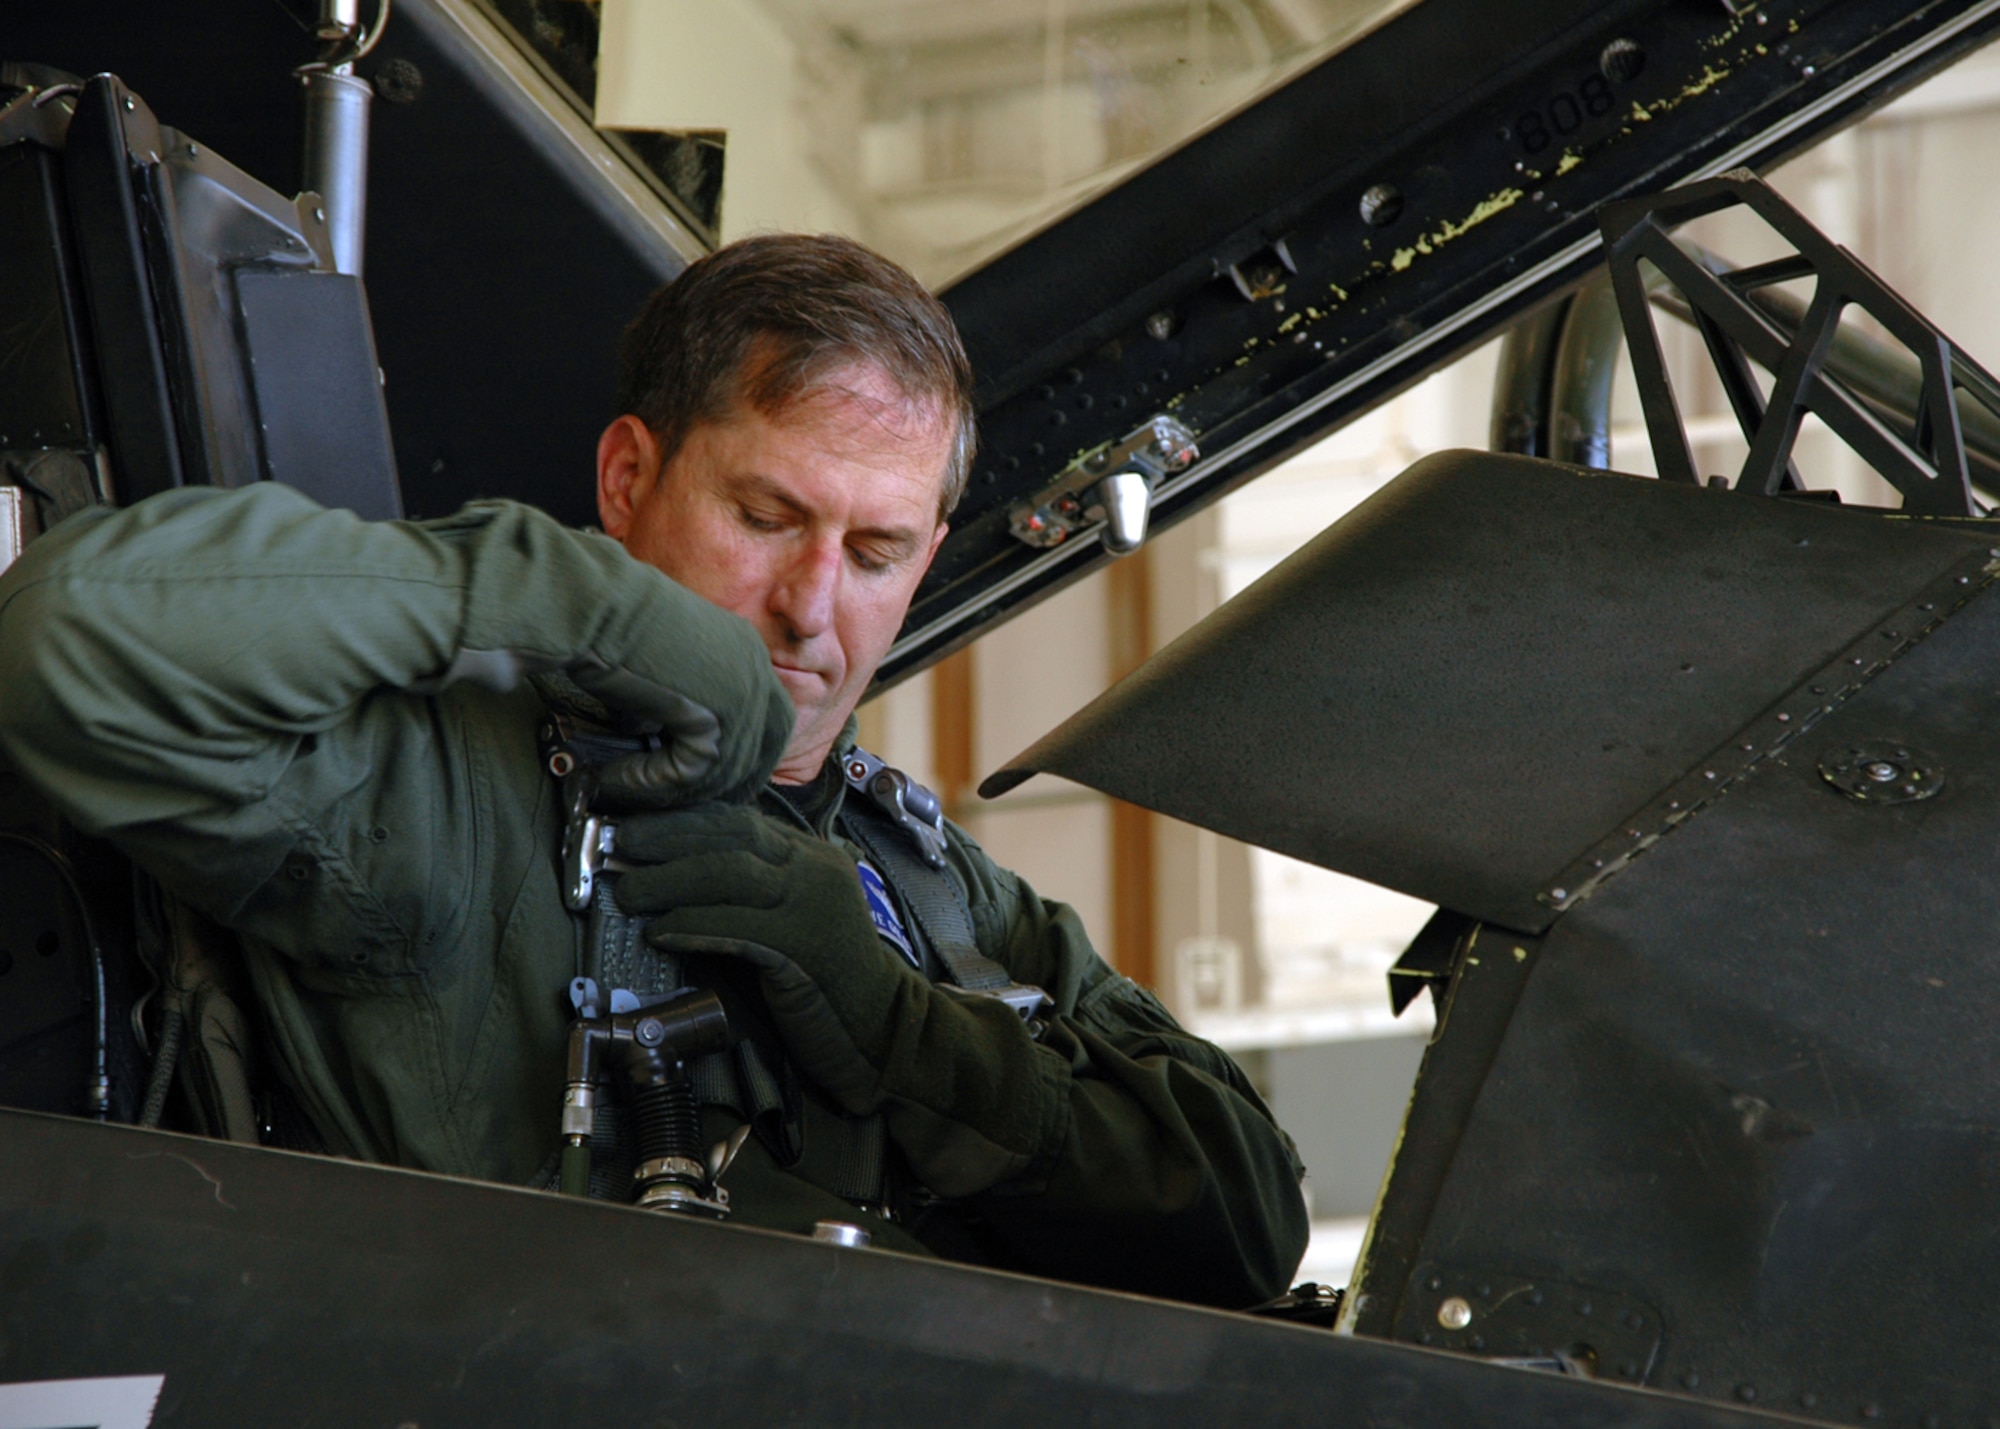 Colonel David Goldfein, commander, 49th Fighter Wing, removes equipment after a successful flight on the F-117A on September 14, 2006, Holloman Air Force Base, New Mexico. This was Col. Goldfein's first flight of the F-117 since assuming command at Holloman. US Air Force photo by Airman Jamal Sutter 